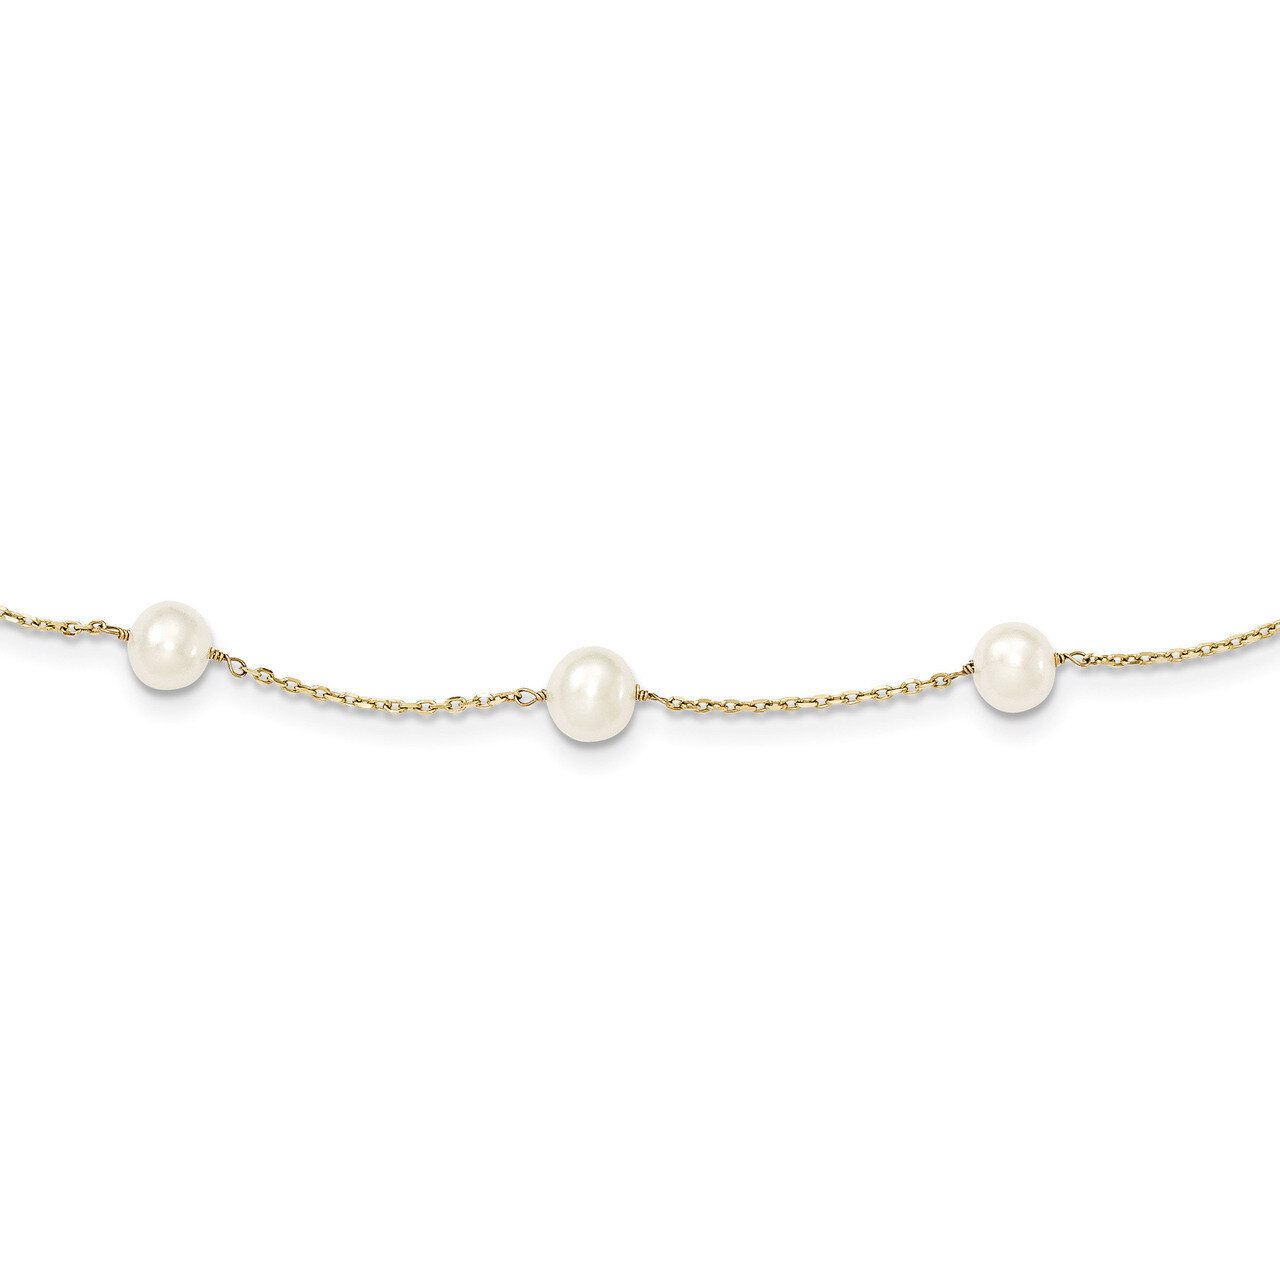 5.5-6.5mm Cultured Pearl Necklace 16 Inch 14k Gold PR56-16